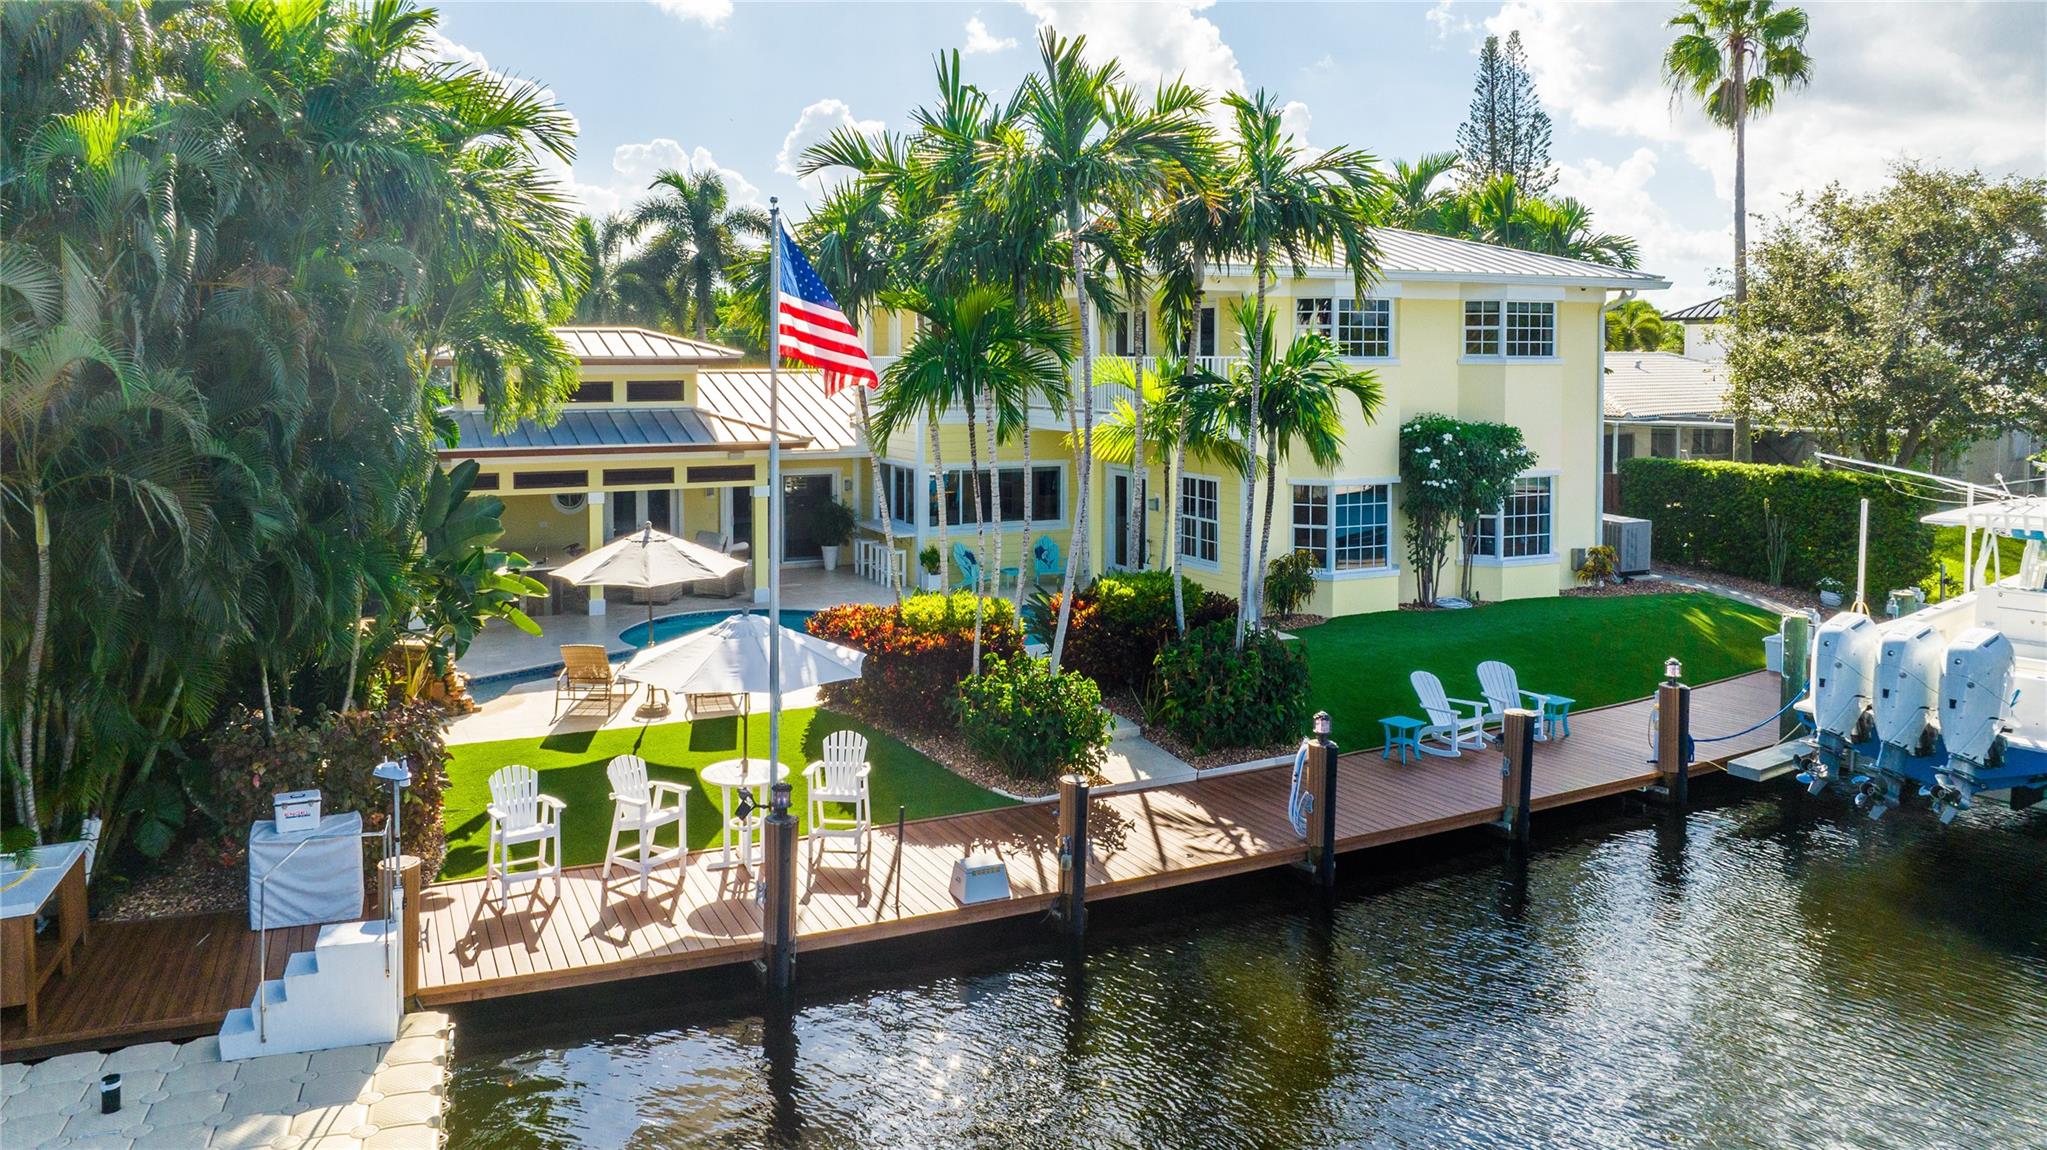 Exceptional waterfront oasis nestled in a cove in the Landings! This tropical paradise boasts 104 ft of water with 94 ft of dockage and 24K lbs. boat lift looking across 170 ft of water giving you a feeling of privacy that is not often found on the water. Inside you will find a remodeled home with a split bed floor plan, 3beds/2baths downstairs. Upstairs you will be able to enjoy another family room plus 2beds/2baths. Gorgeous Landscaping surrounds the property with zoysia grass in front and artificial turf out back.  The large lanai makes a perfect hang out and is equipped with a grill, flat top, ice maker and refrigerator. Natural gas runs the 45KW whole house generator, Wolf stove, oven, grills and tank-less water heaters.